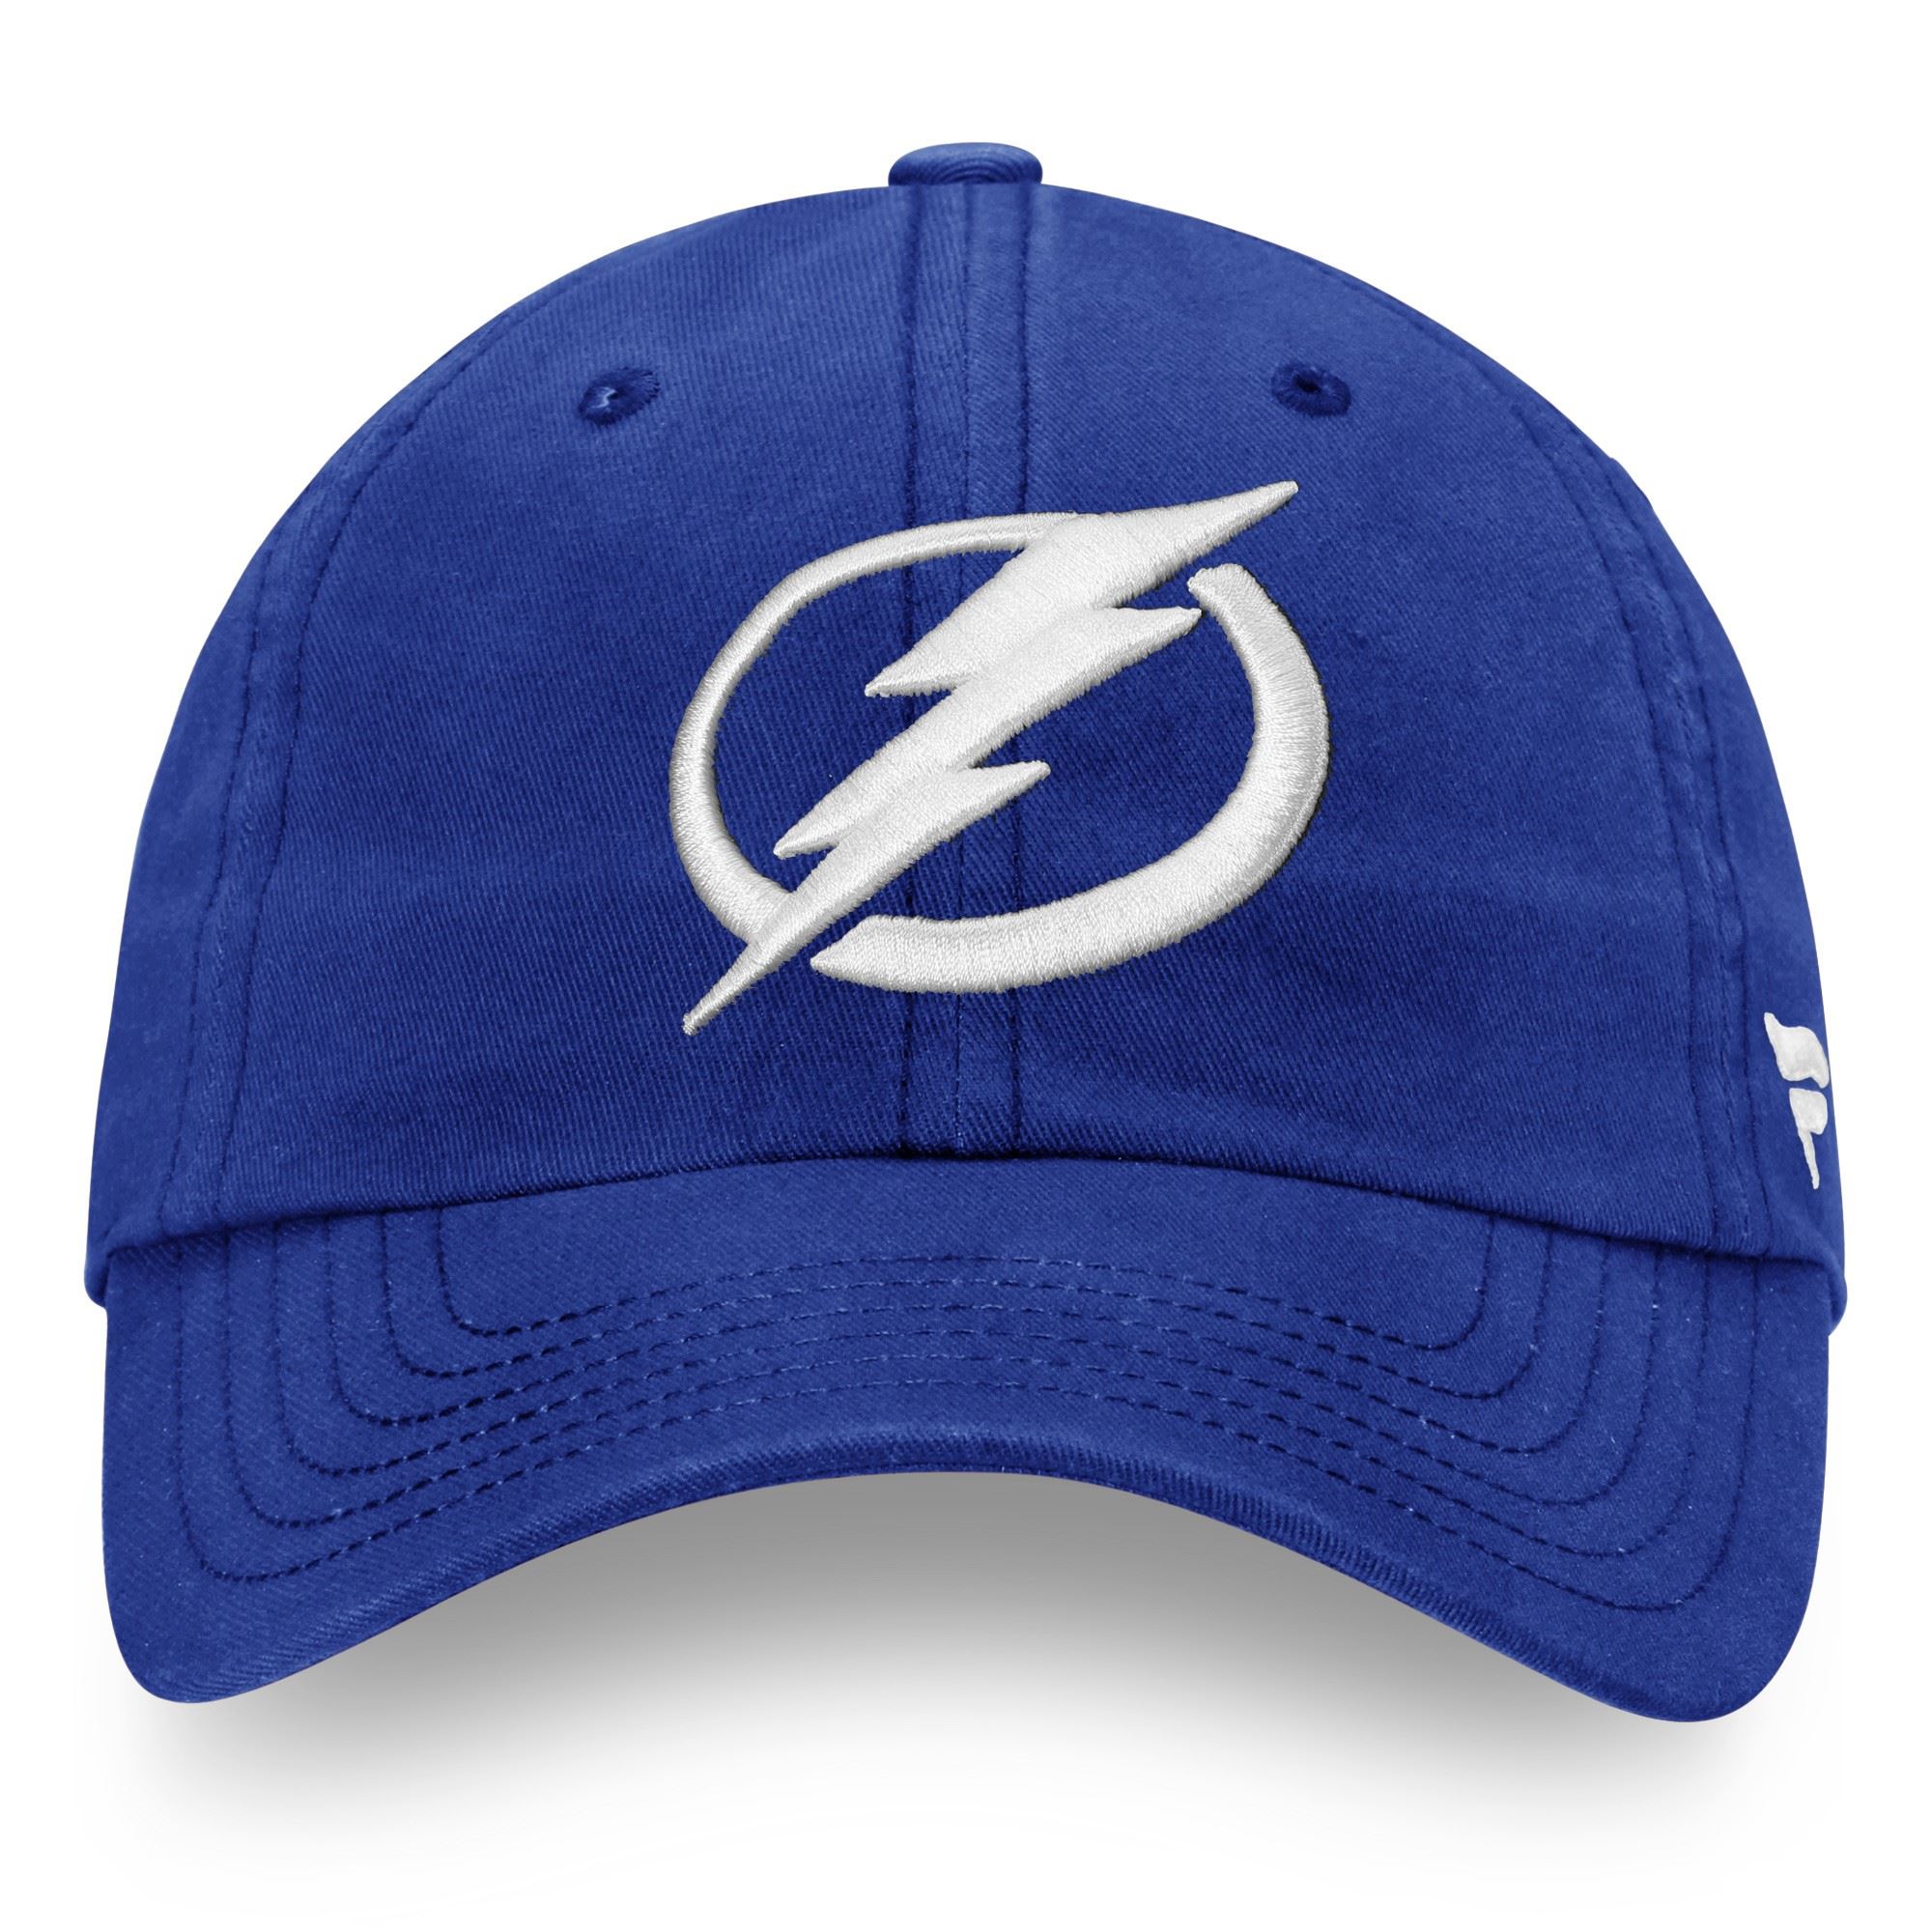 Tampa Bay Lightning NHL Core Royal Curved Unstructured Strapback Cap Fanatics